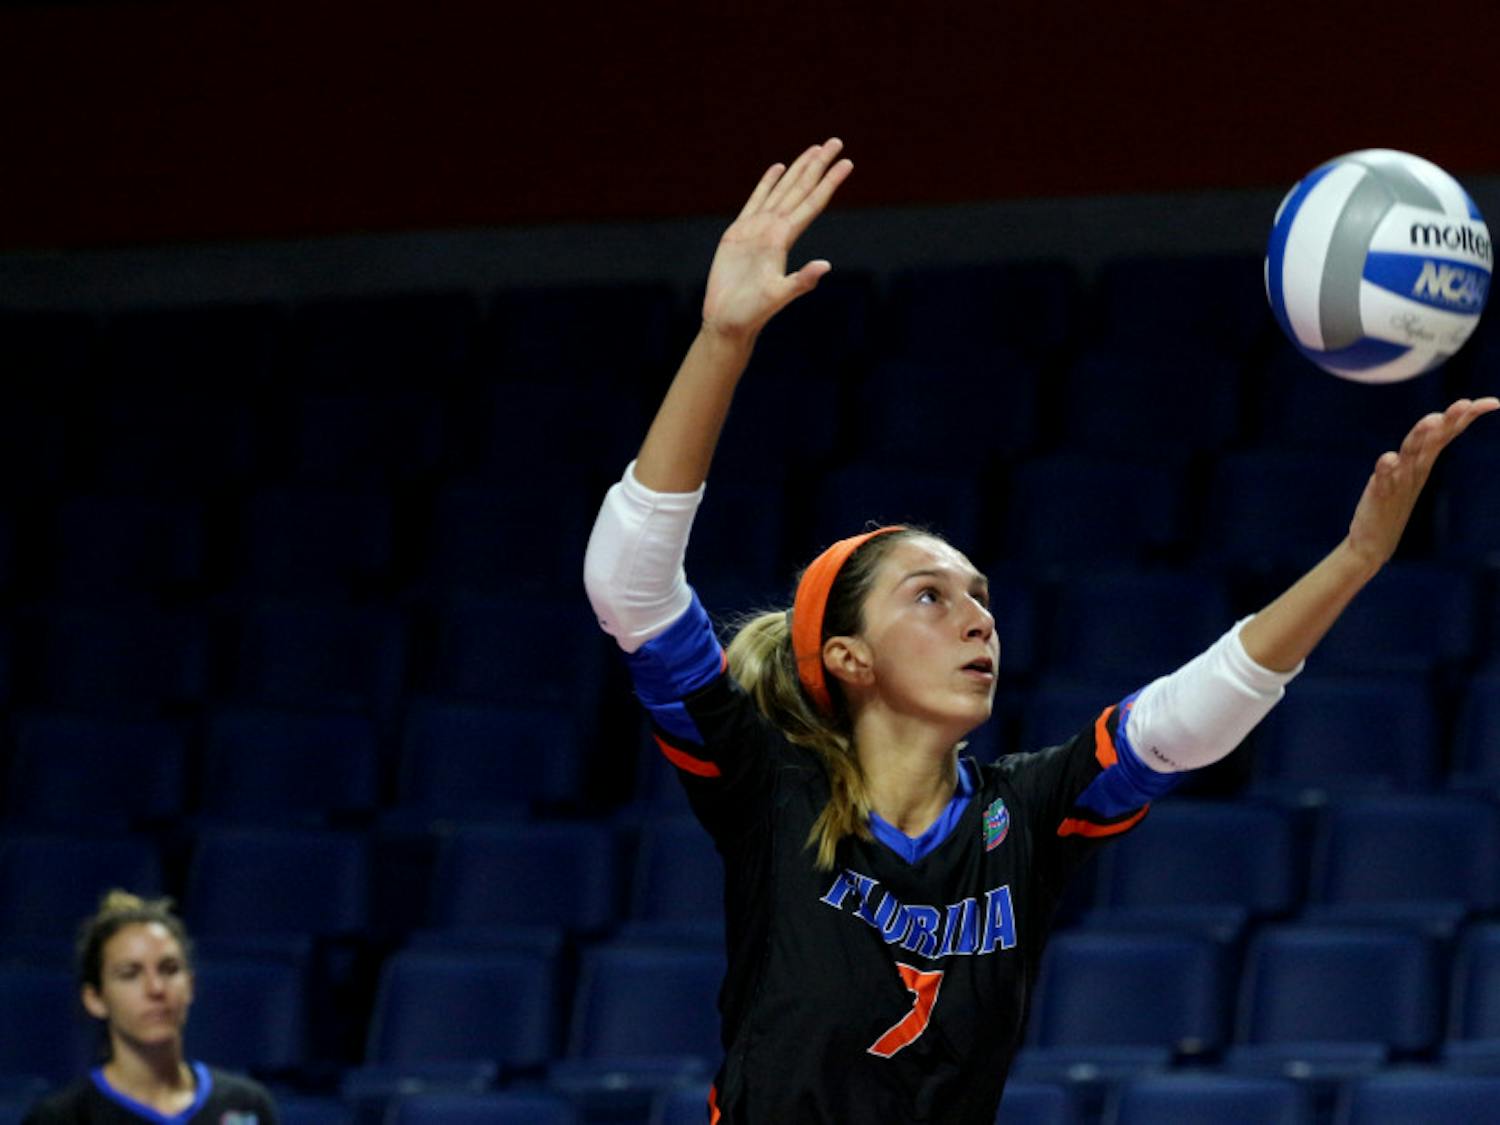 After recording 105 kills in 32 games in 2017, UF outside hitter Paige Hammons showed off her defense in the 2018 Orange and Blue scrimmage. 